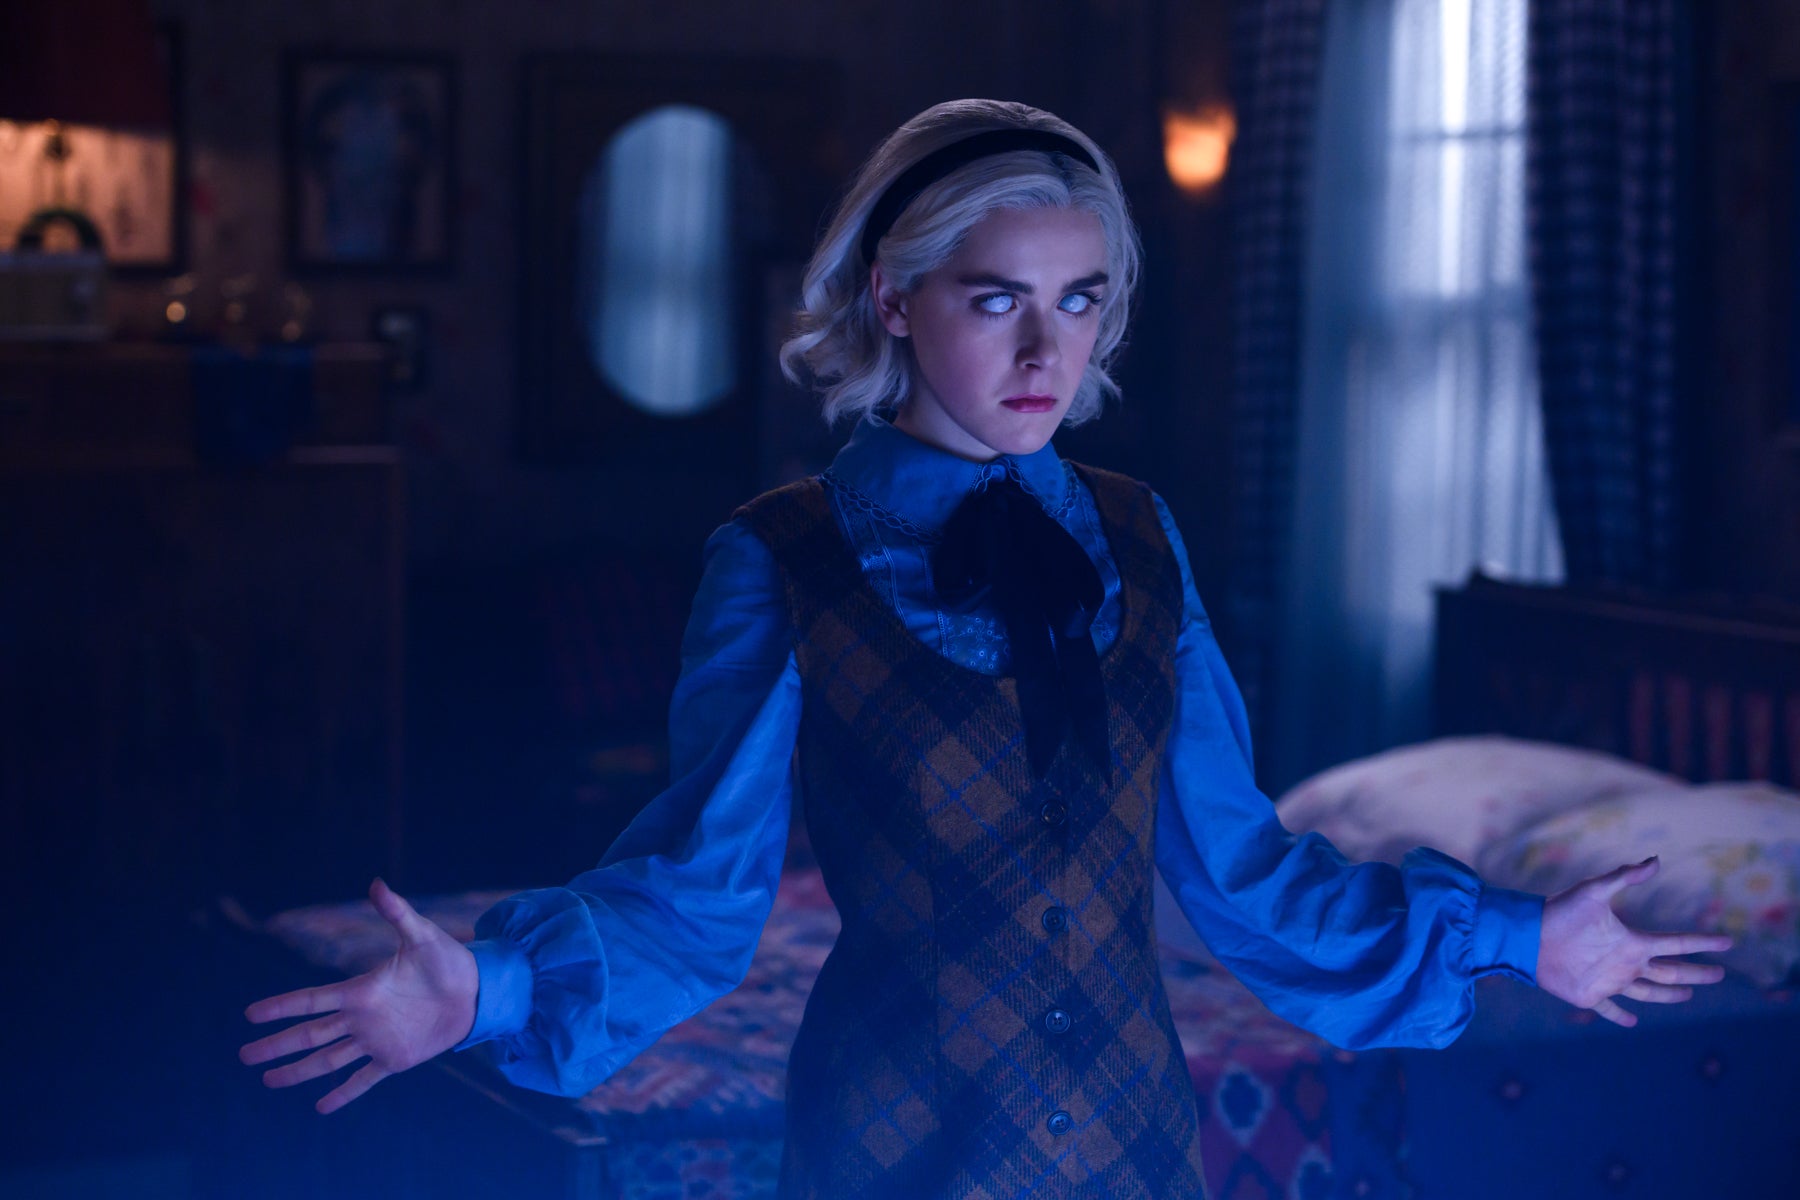 Sabrina Spellman stands with arms outstretched in a darkened room in a scene from Chilling Adventures of Sabrina.